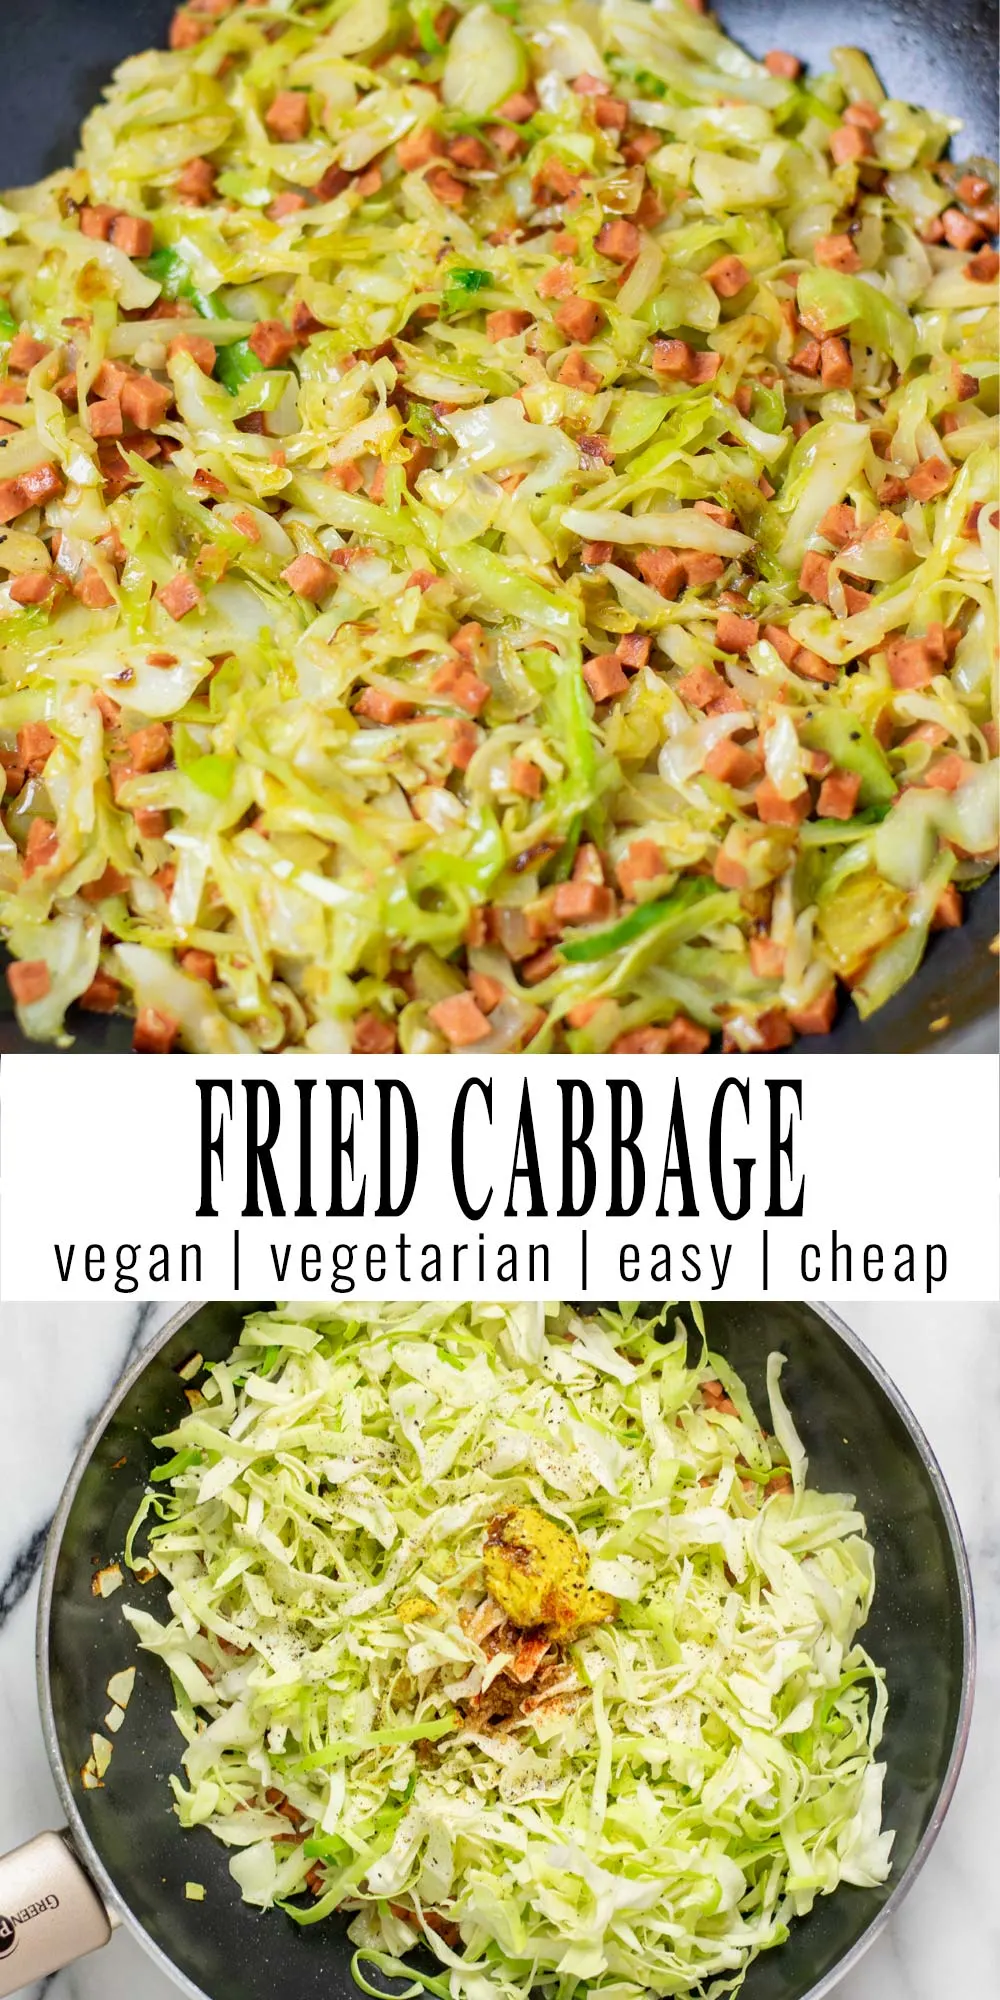 Collage of two pictures of the Fried Cabbage with recipe title text.